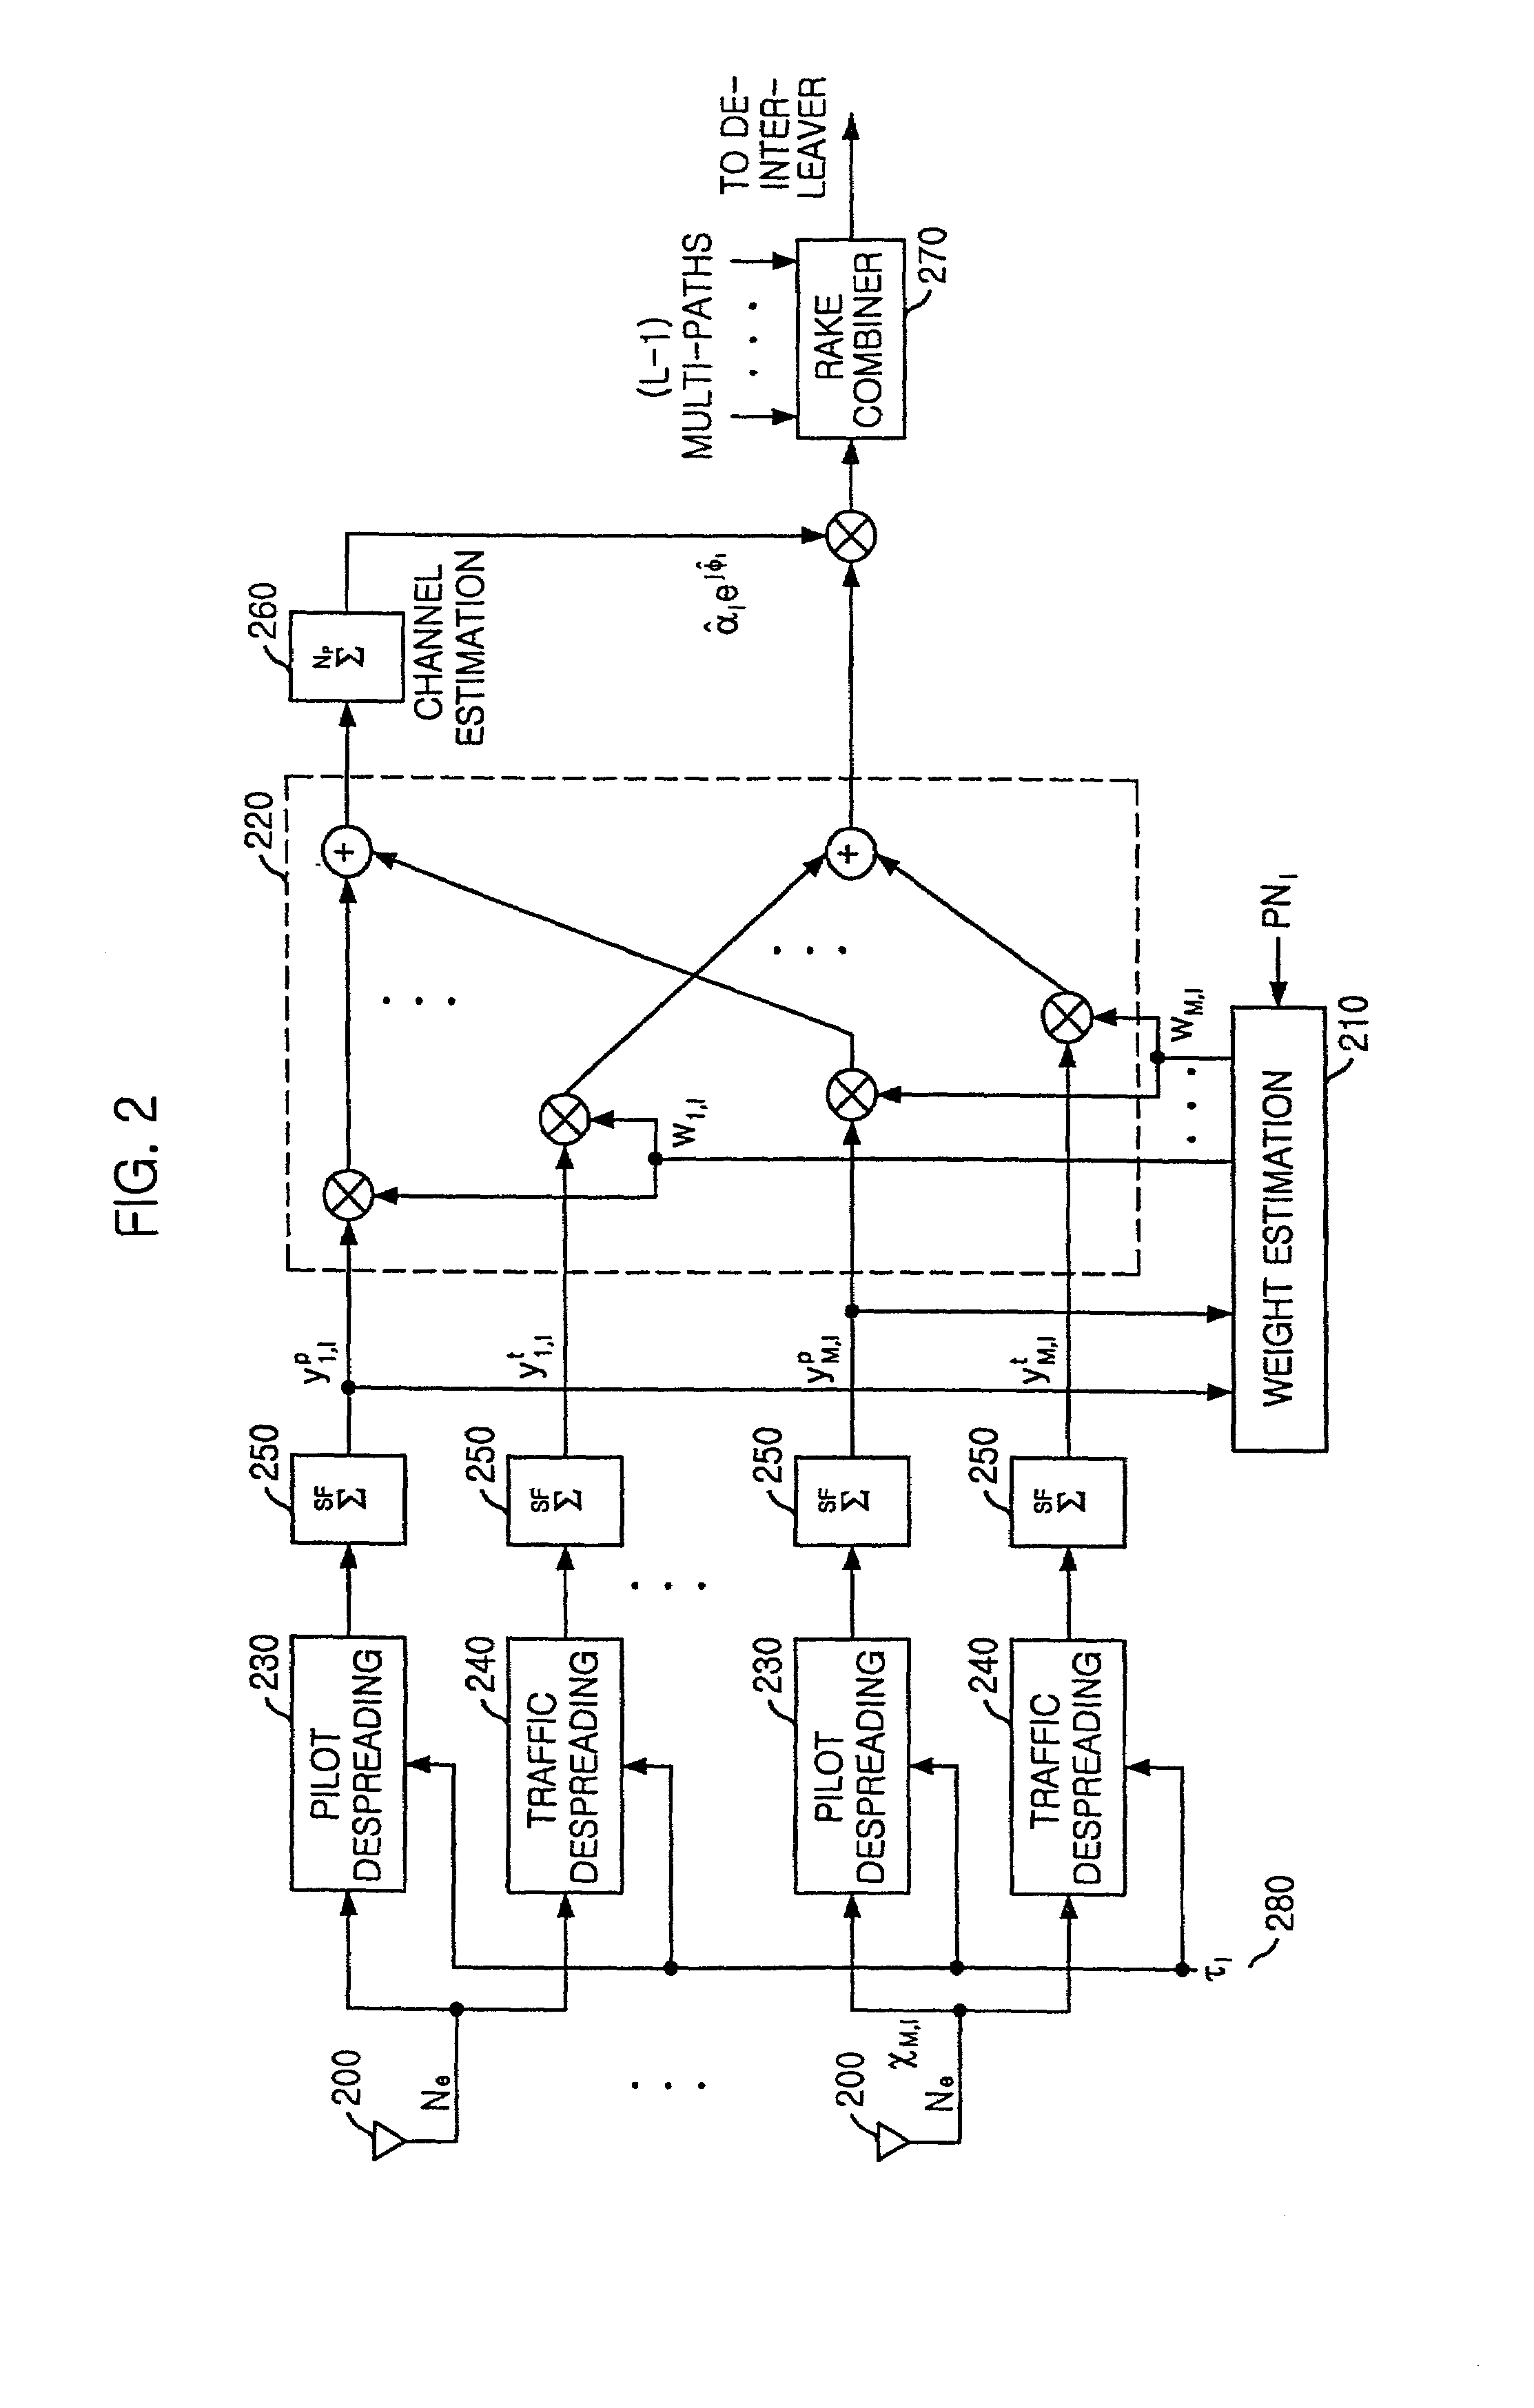 Apparatus and method for very high performance space-time array reception processing using chip-level beamforming and fading rate adaptation